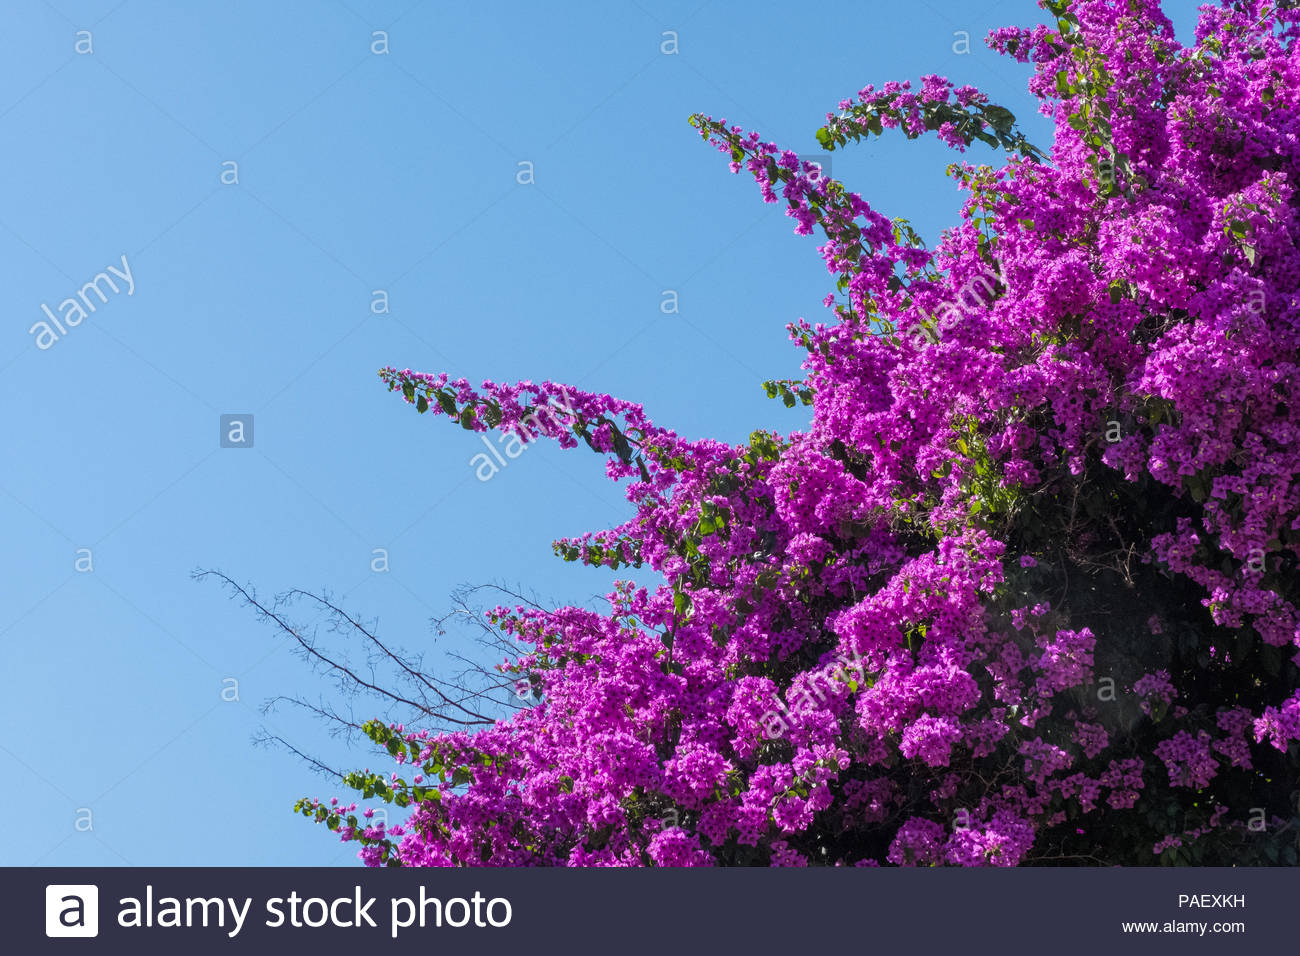 Wallpaper Of A Bougainvillea Flower Tree And Blue Sky In The